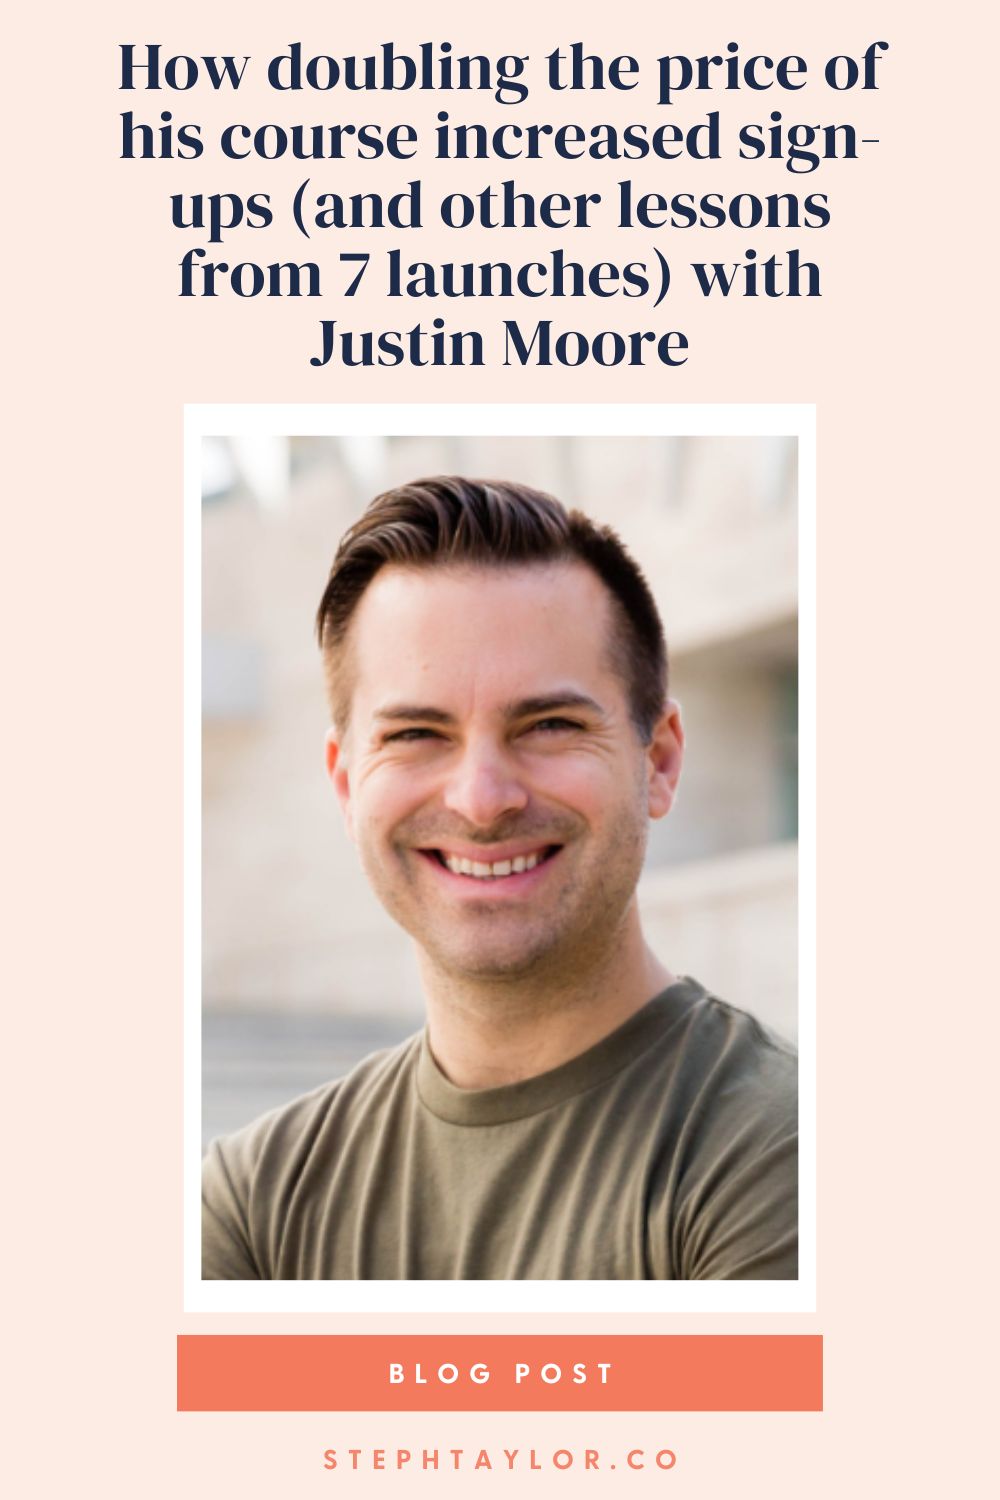 How doubling the price of his course increased sign-ups (and other lessons from 7 launches) with Justin Moore